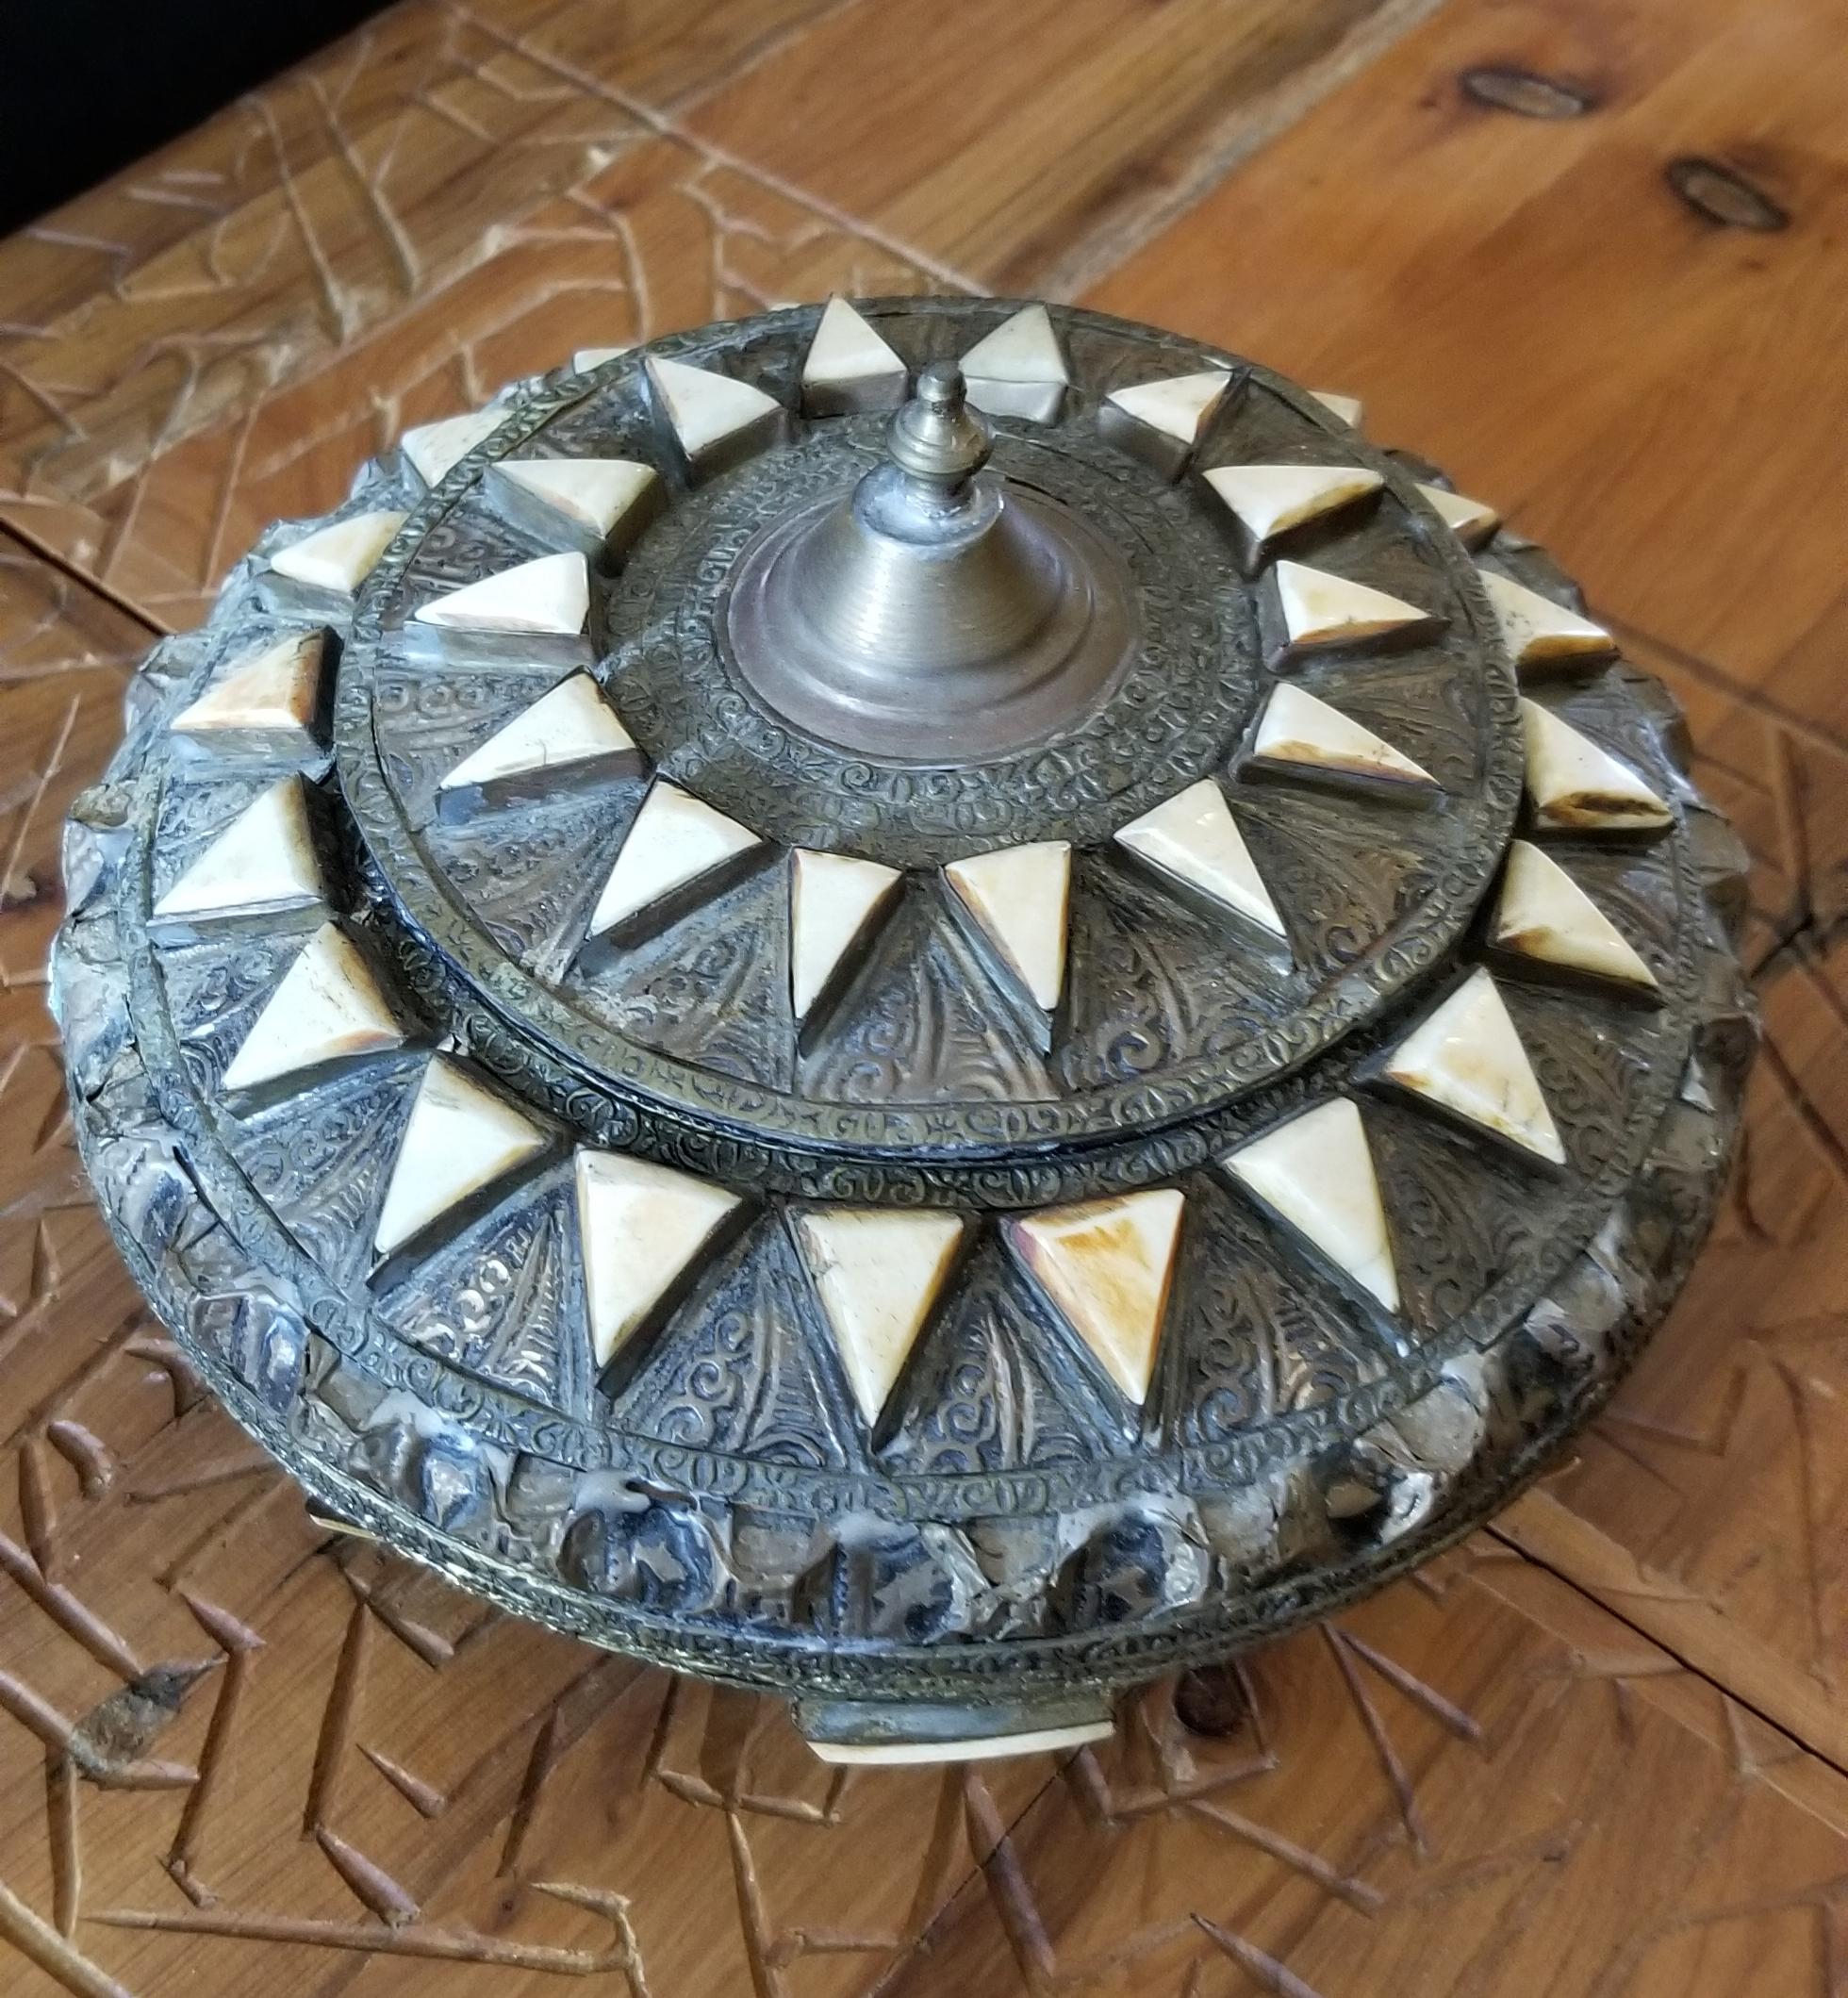 Vintage Moroccan Metal and Bone Inlaid Spice Box or Canister, 1 In Good Condition For Sale In Orlando, FL